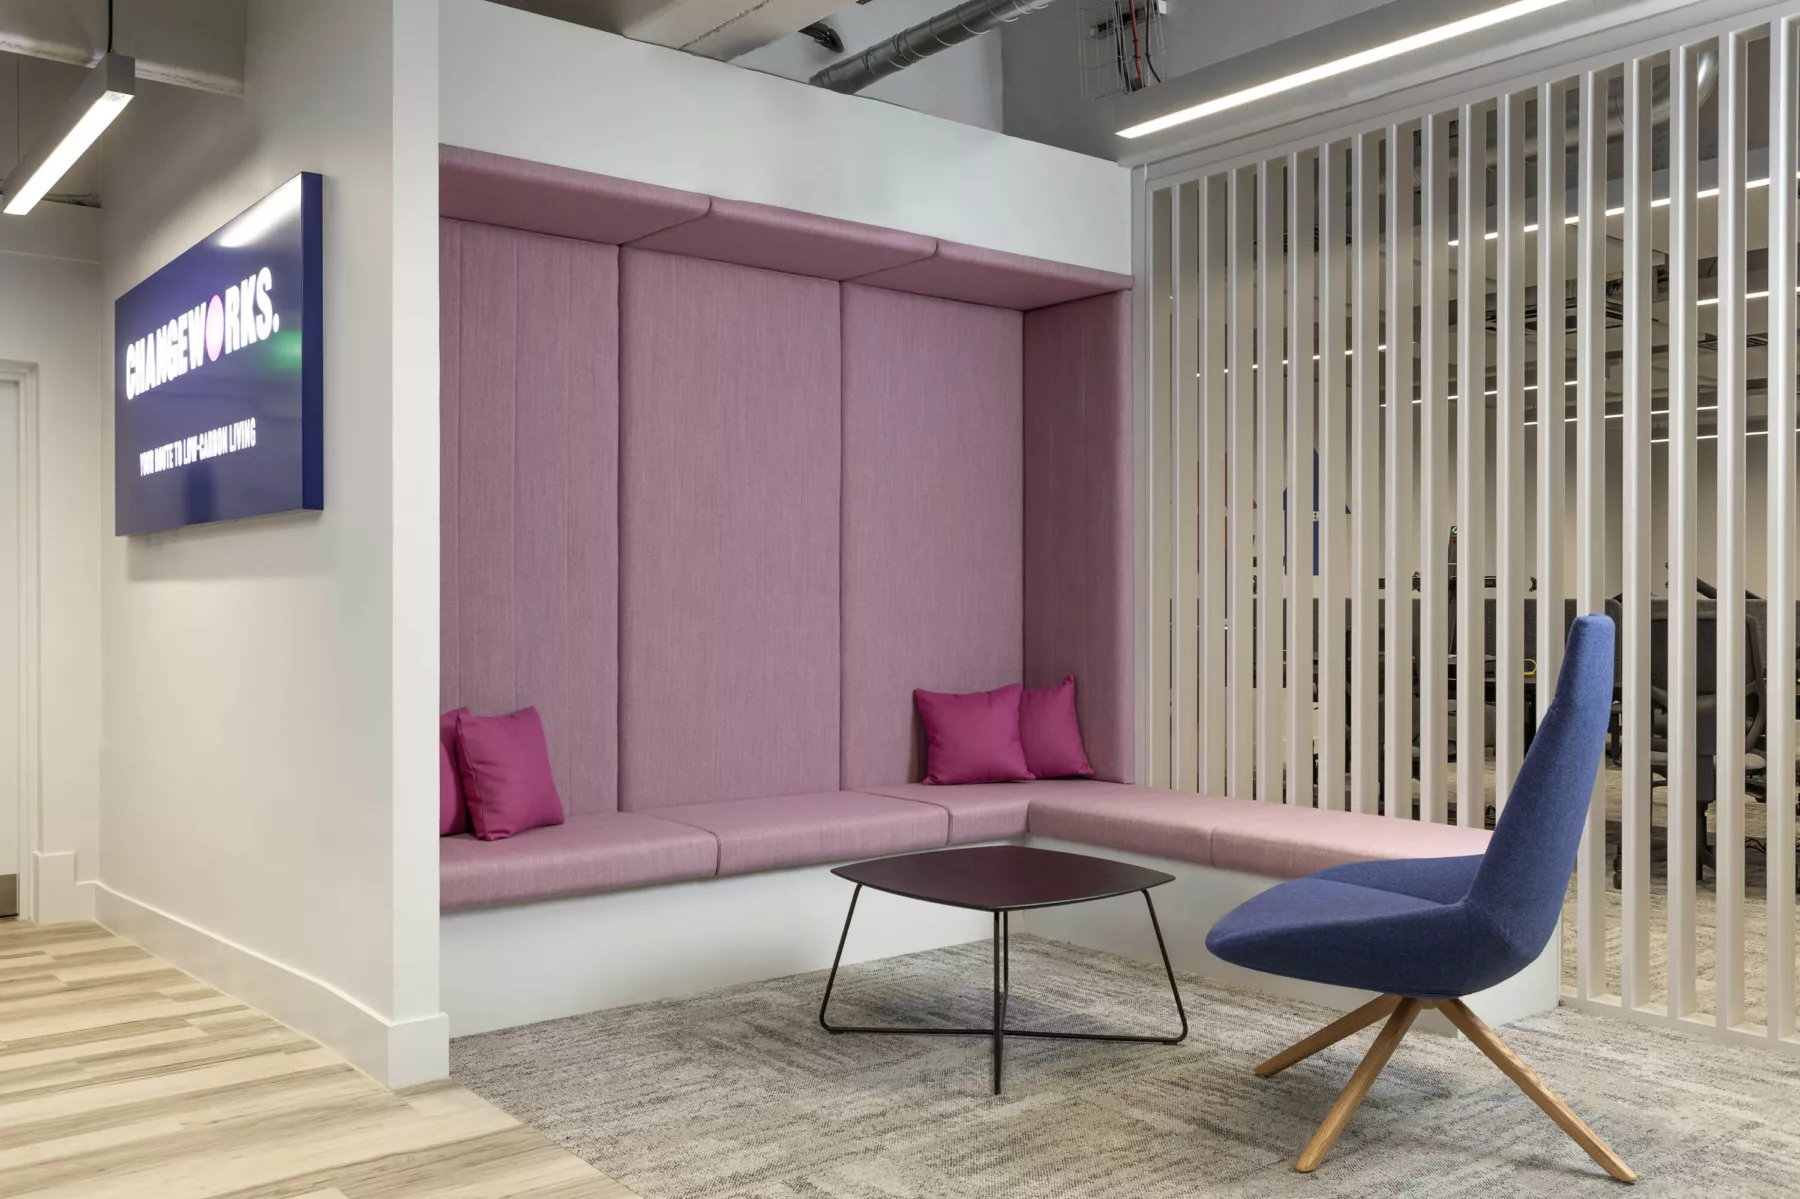 Group seating area with upholstery for sound insulation, and relaxed seating in the contemporary cat-B office fit out for Changeworks, Edinburgh. Recessed seating is upholstered in dusky pink. An easy chair in blue and a wire-framed table. Slatted, open partition. runs floor to ceiling.